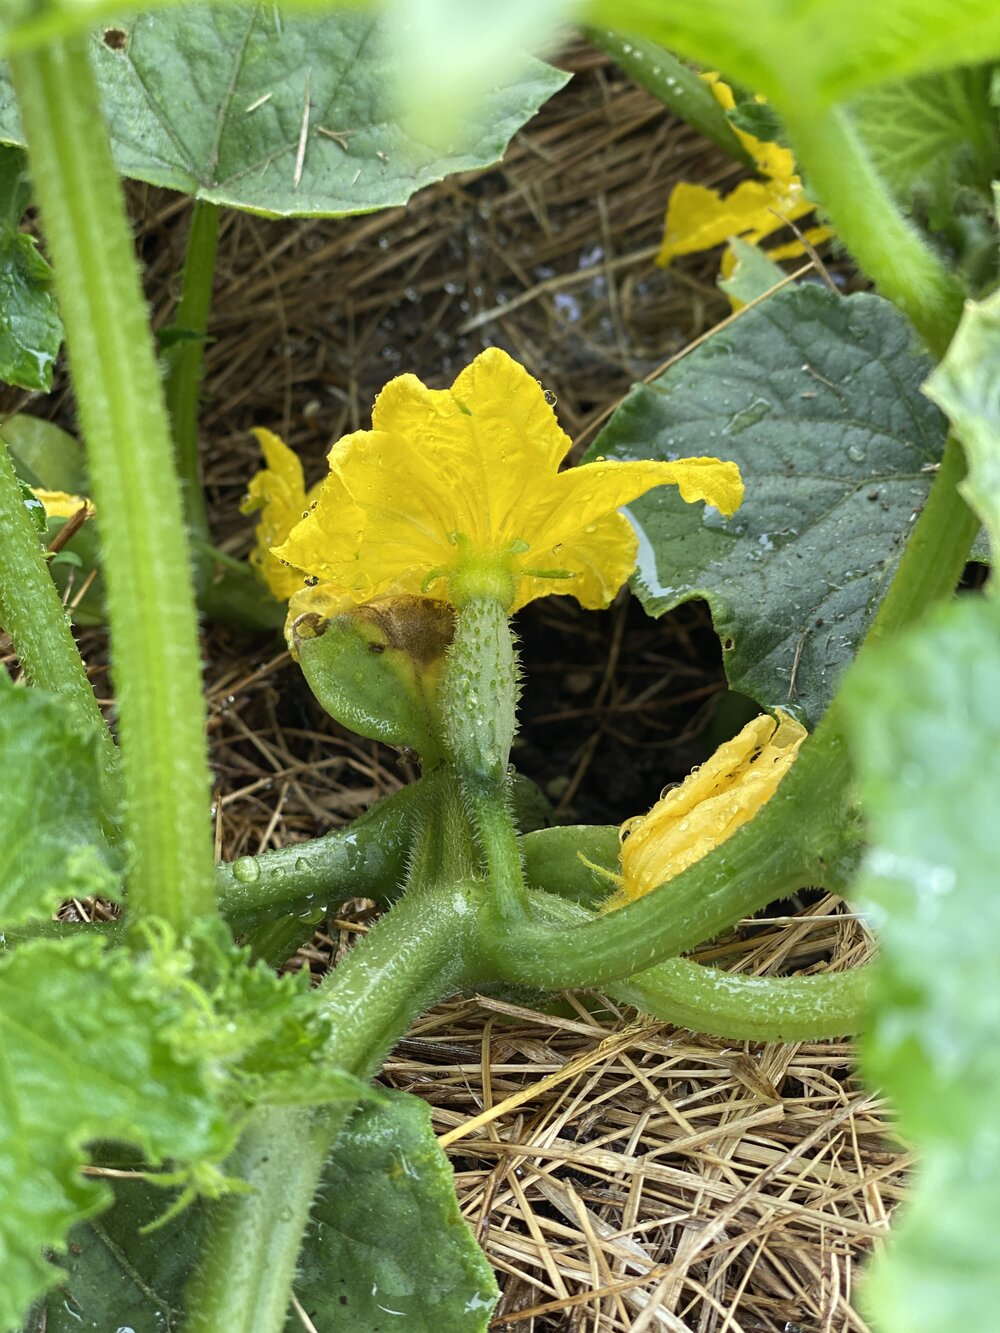 A baby cucumber growing